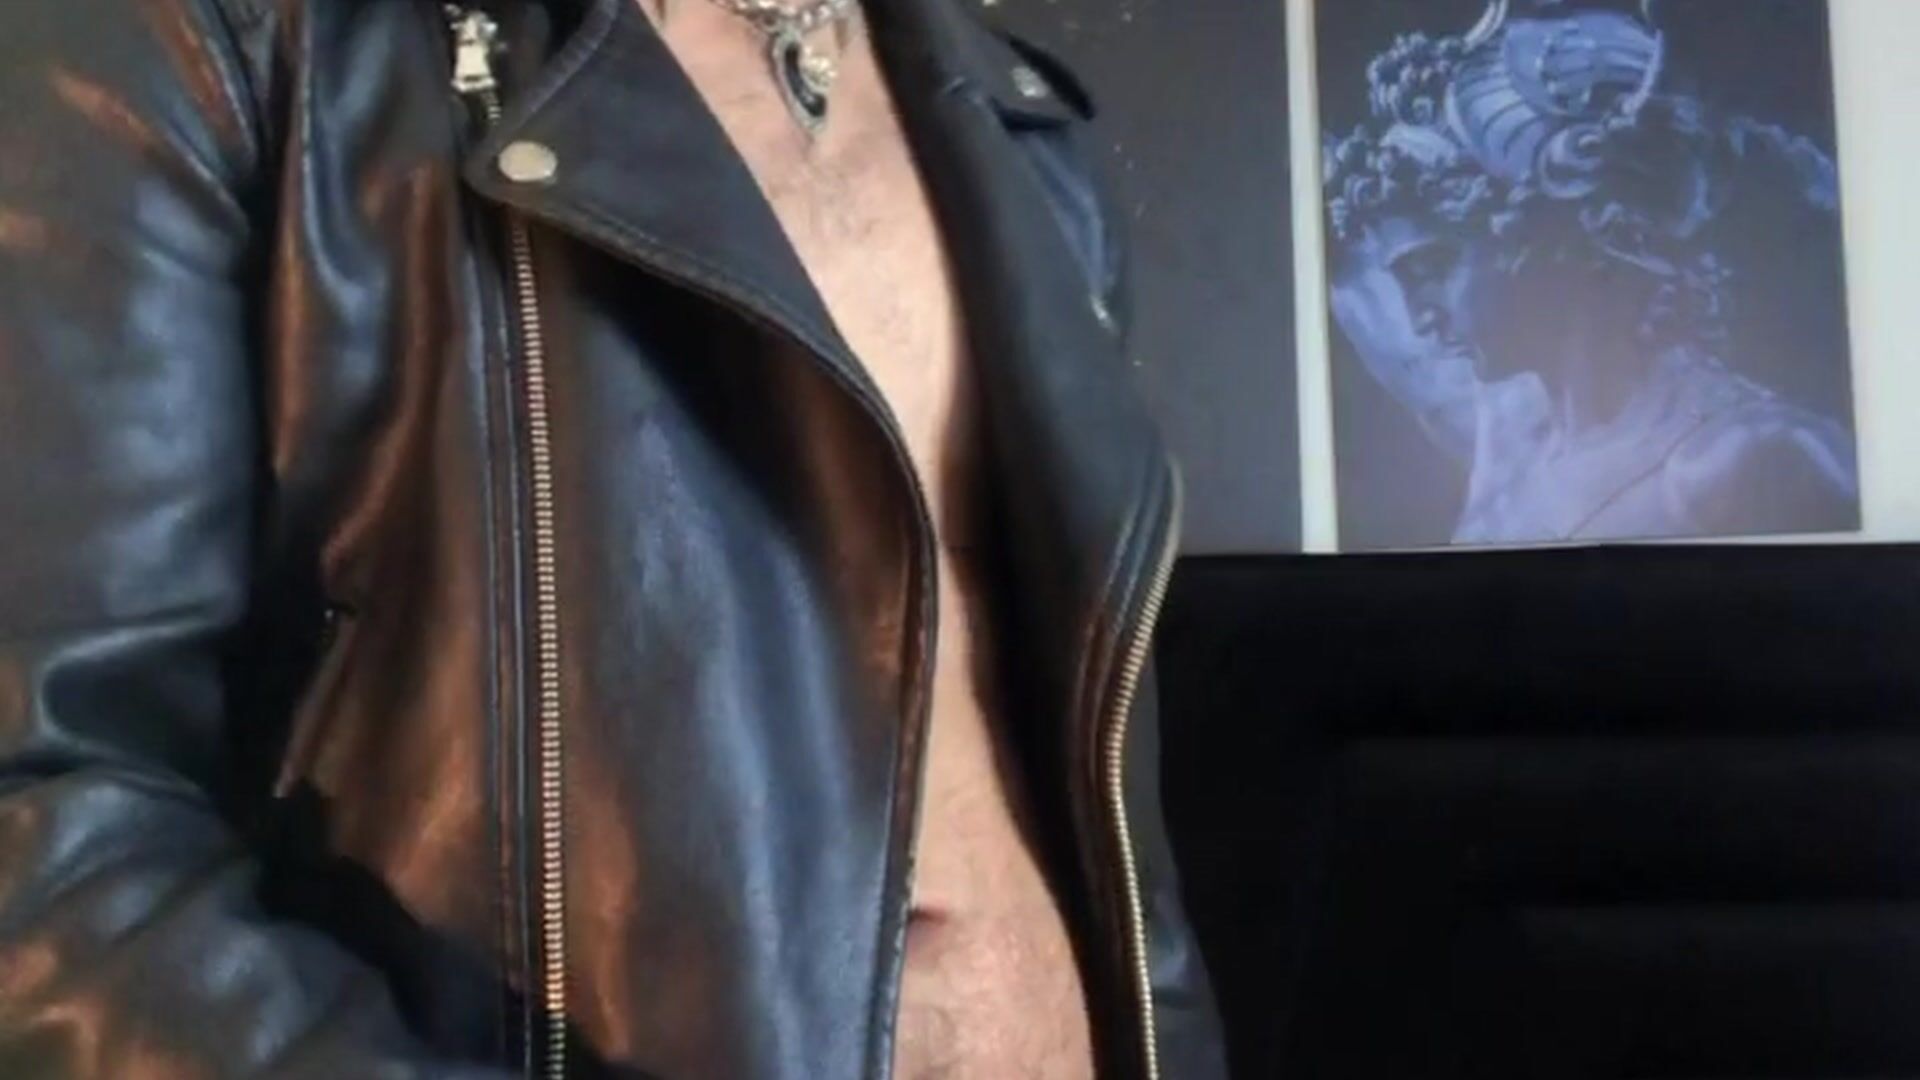 Suck my leather cock 😈😏😏